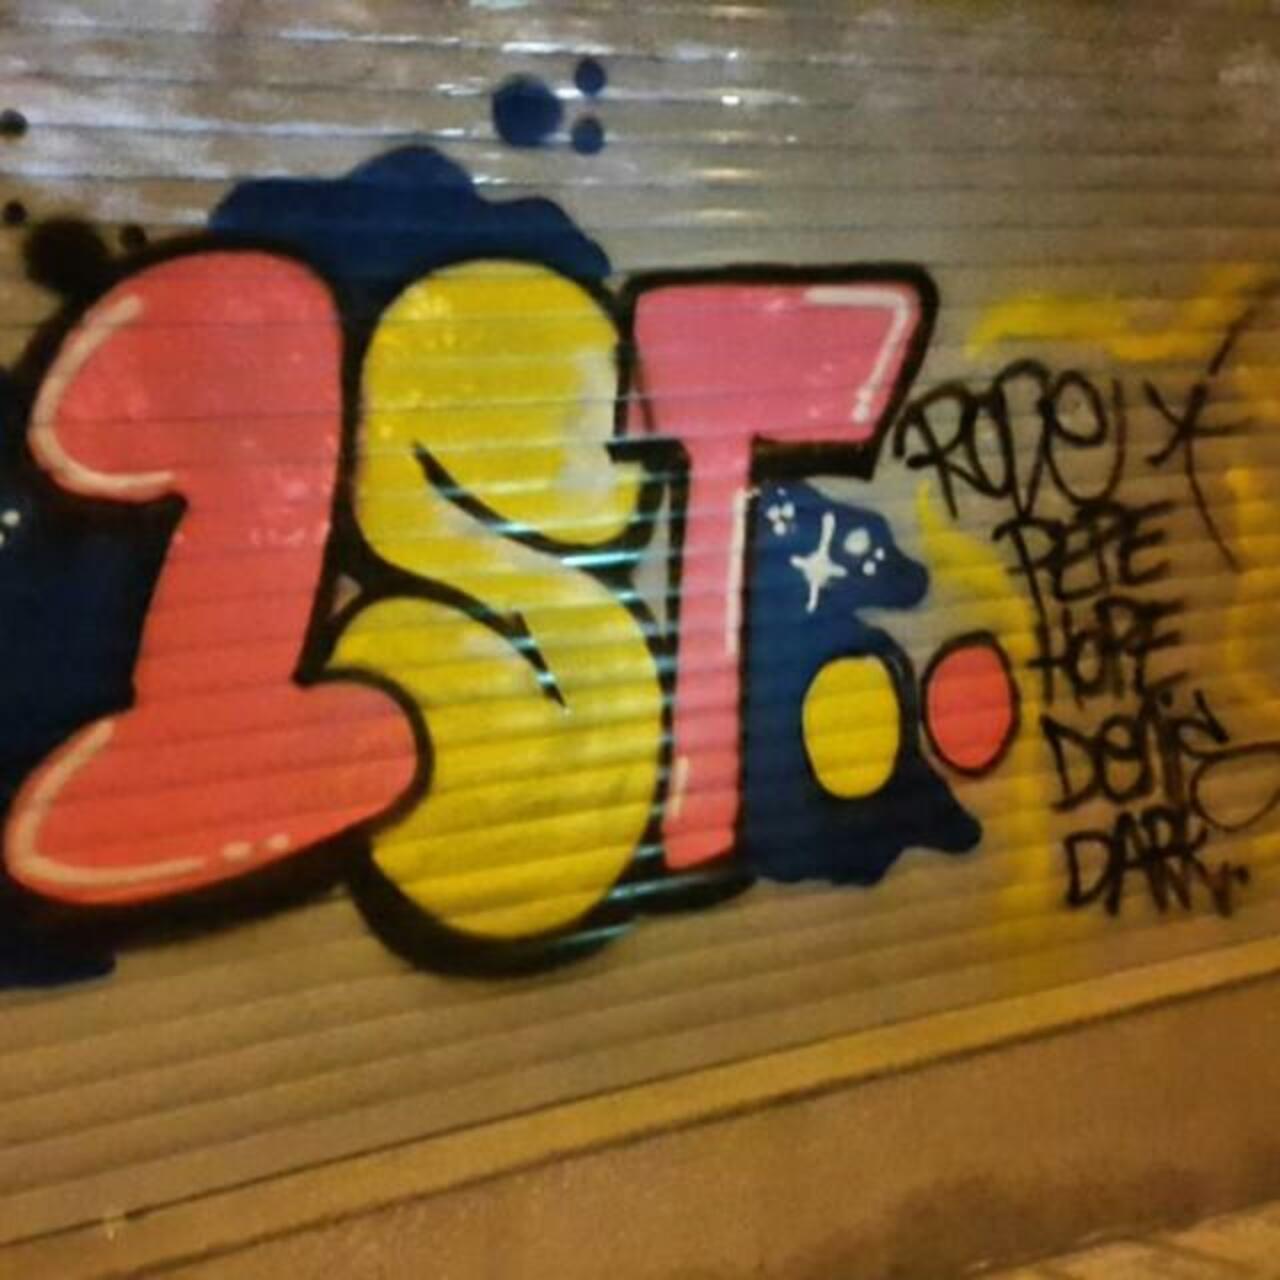 1ST BROTHERS #1stcrew #graffiti #streetart #istanbul #graff #art #streetartistanbul #graffitiart #graffititurkey by… http://t.co/DT118AgMLX